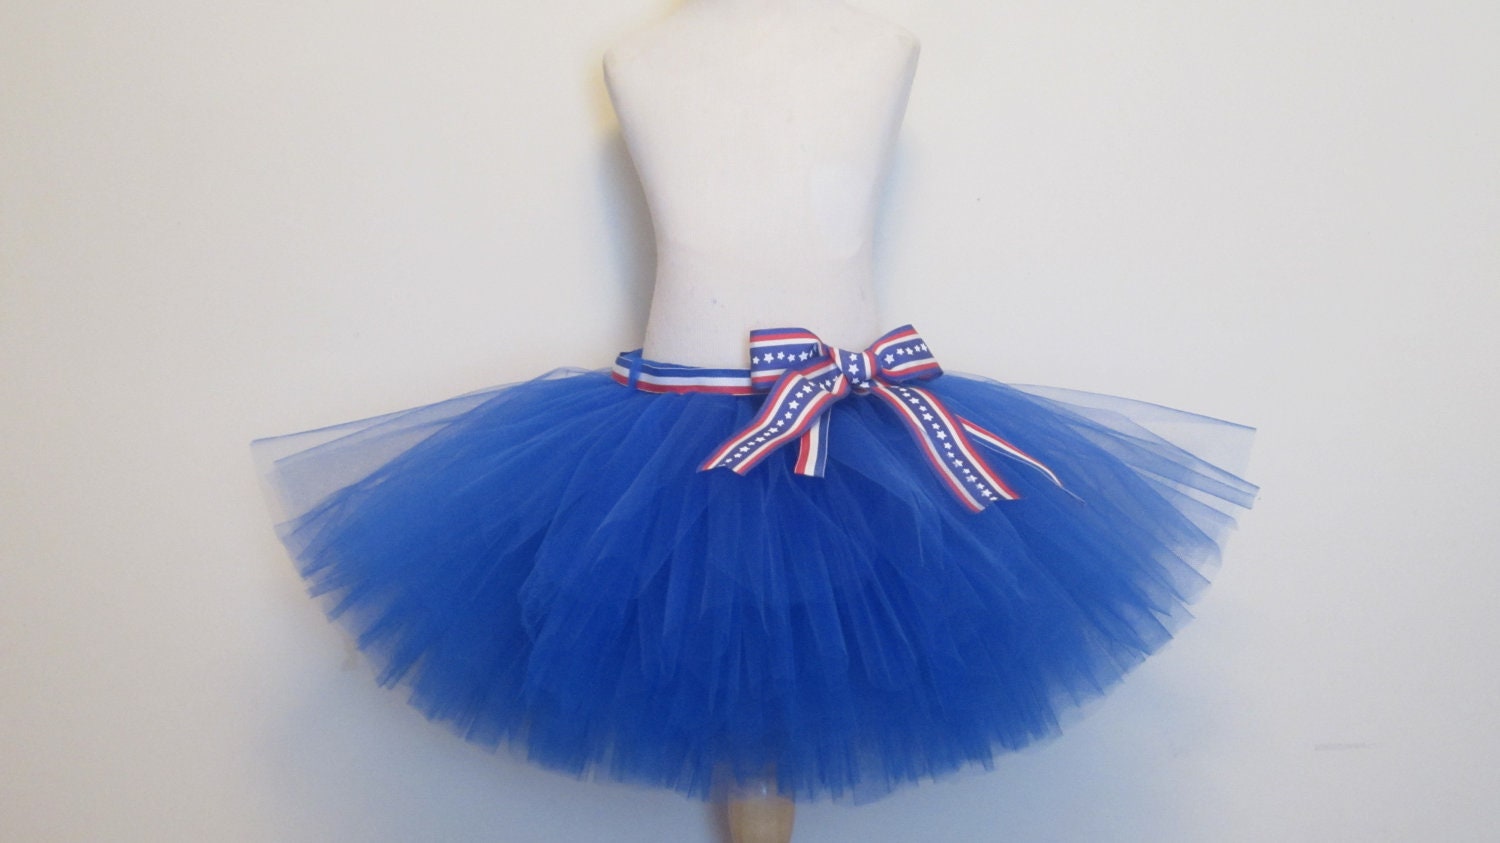 Newborn Tutu Patriotic Tutu Skirt Red White Stars Blue Baby Photo Prop Patriotic 4th of July Skirt By American Blossoms - AmericanBlossoms